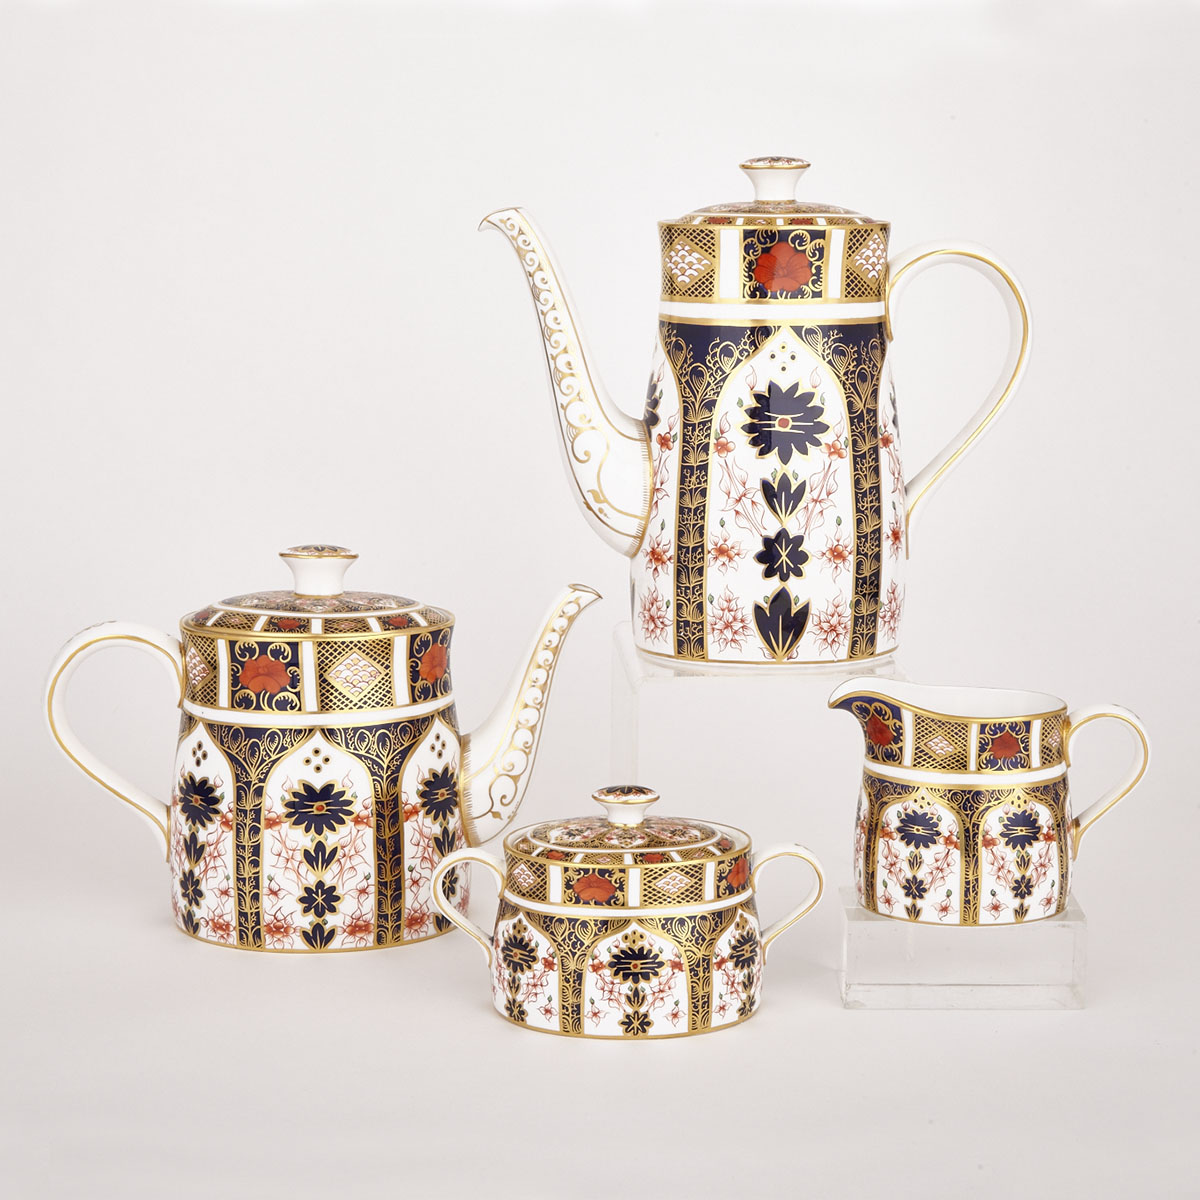 Royal Crown Derby ‘Old Imari’ (1128) Pattern Four-Piece Tea and Coffee Service, c.1968-1969